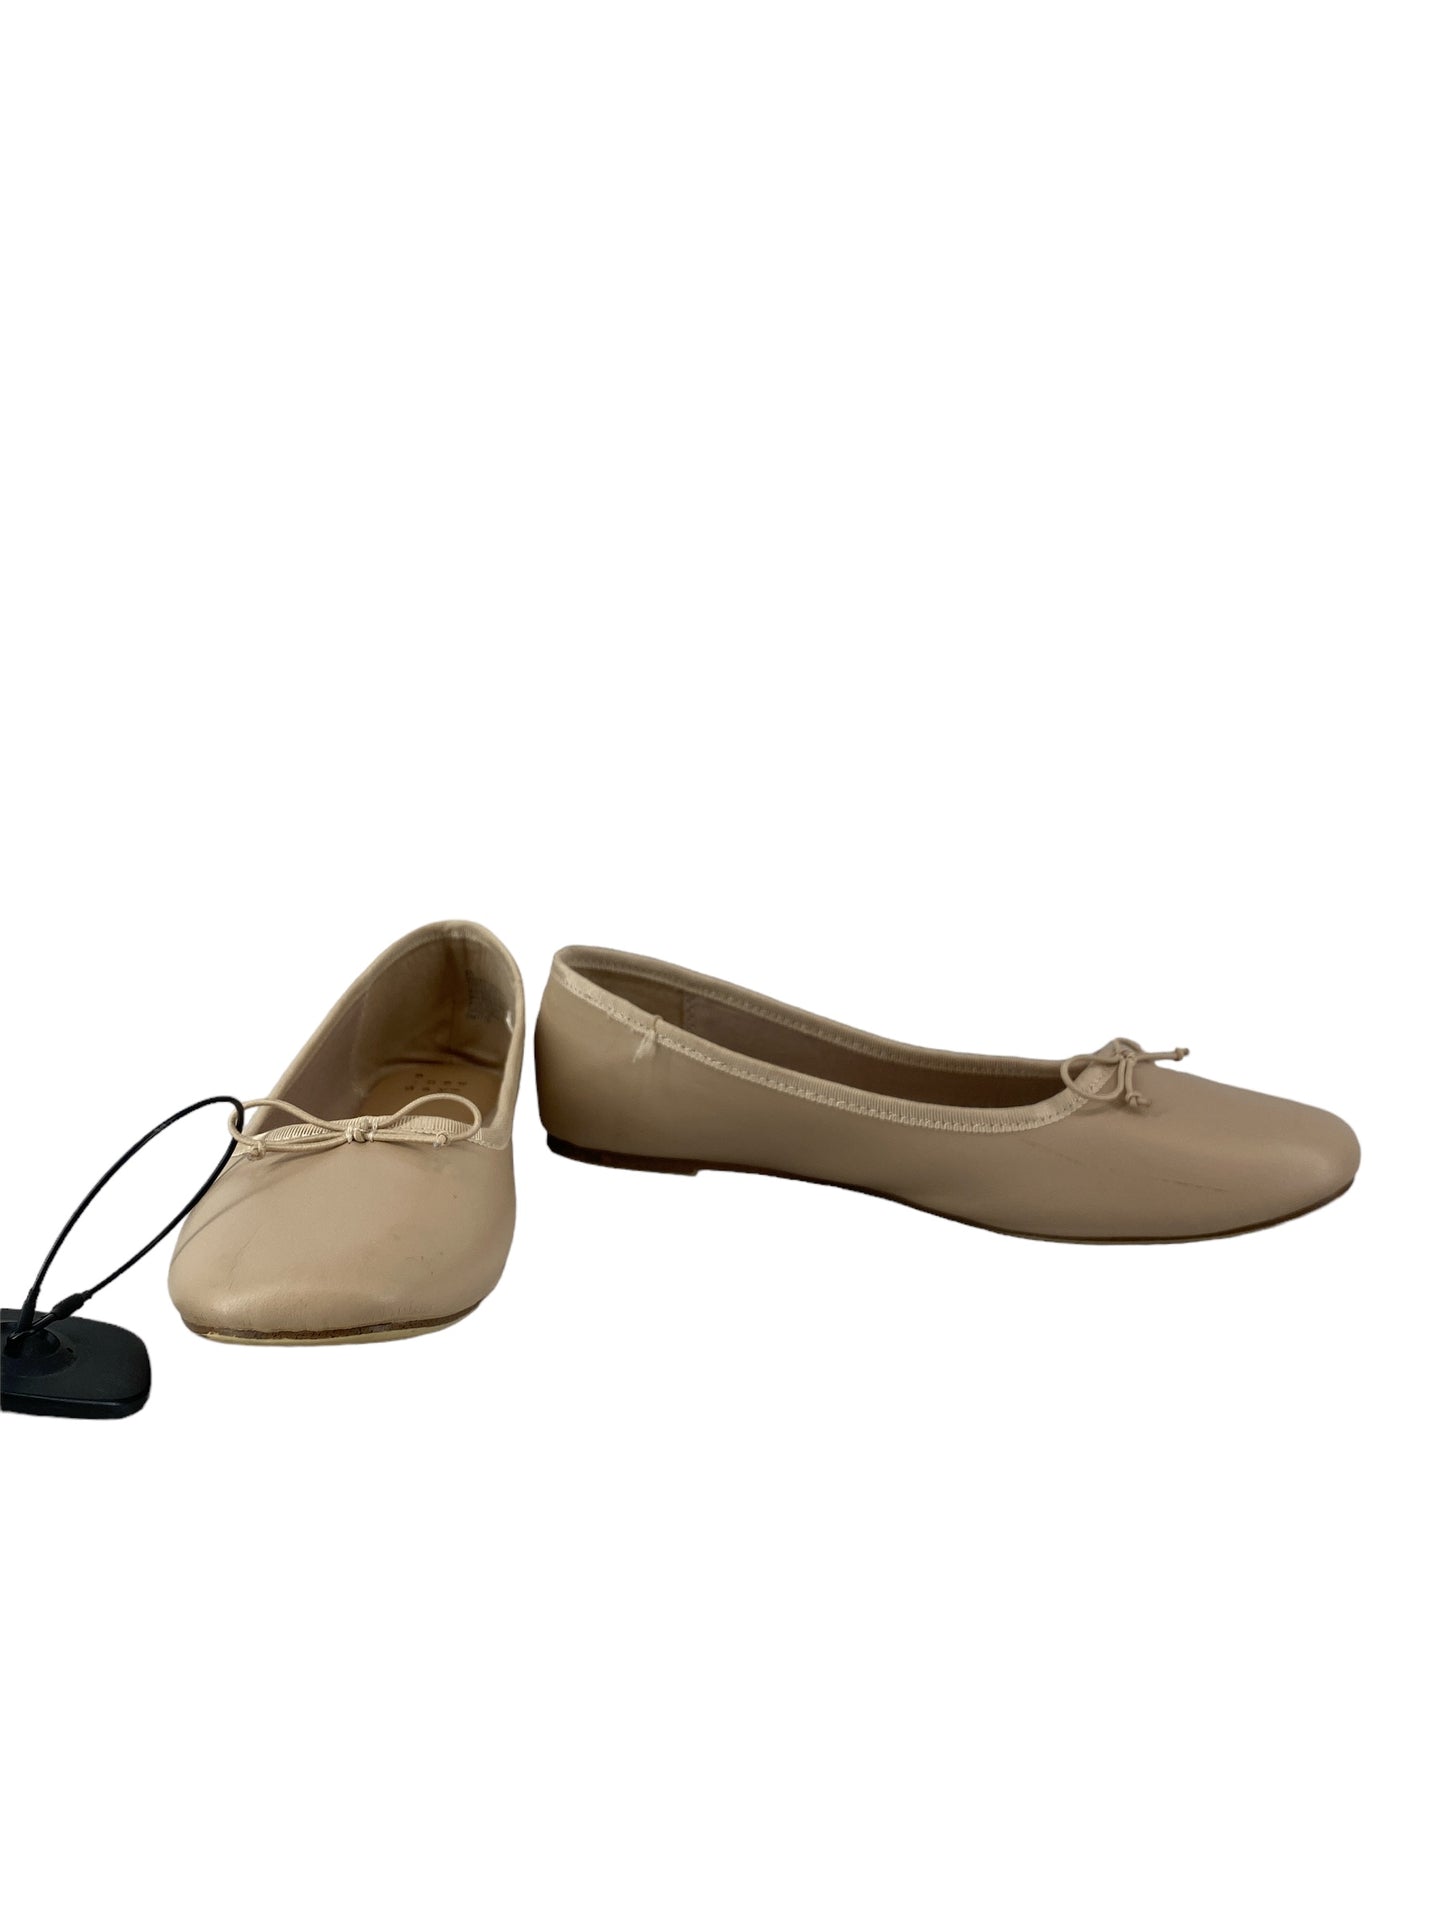 Shoes Flats Ballet By A New Day  Size: 8.5